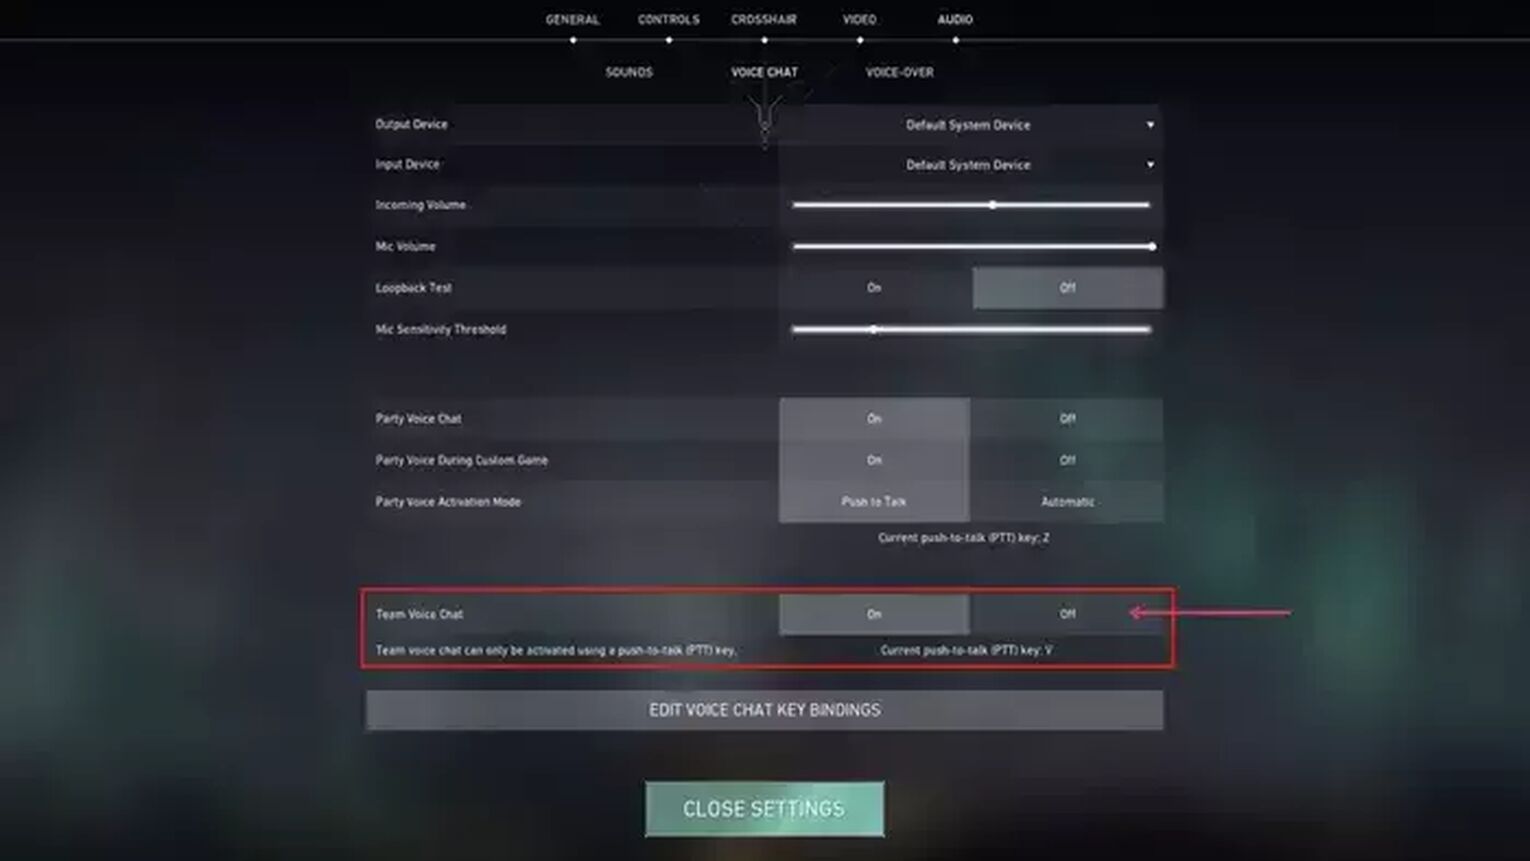 Team Voice Chat Disable